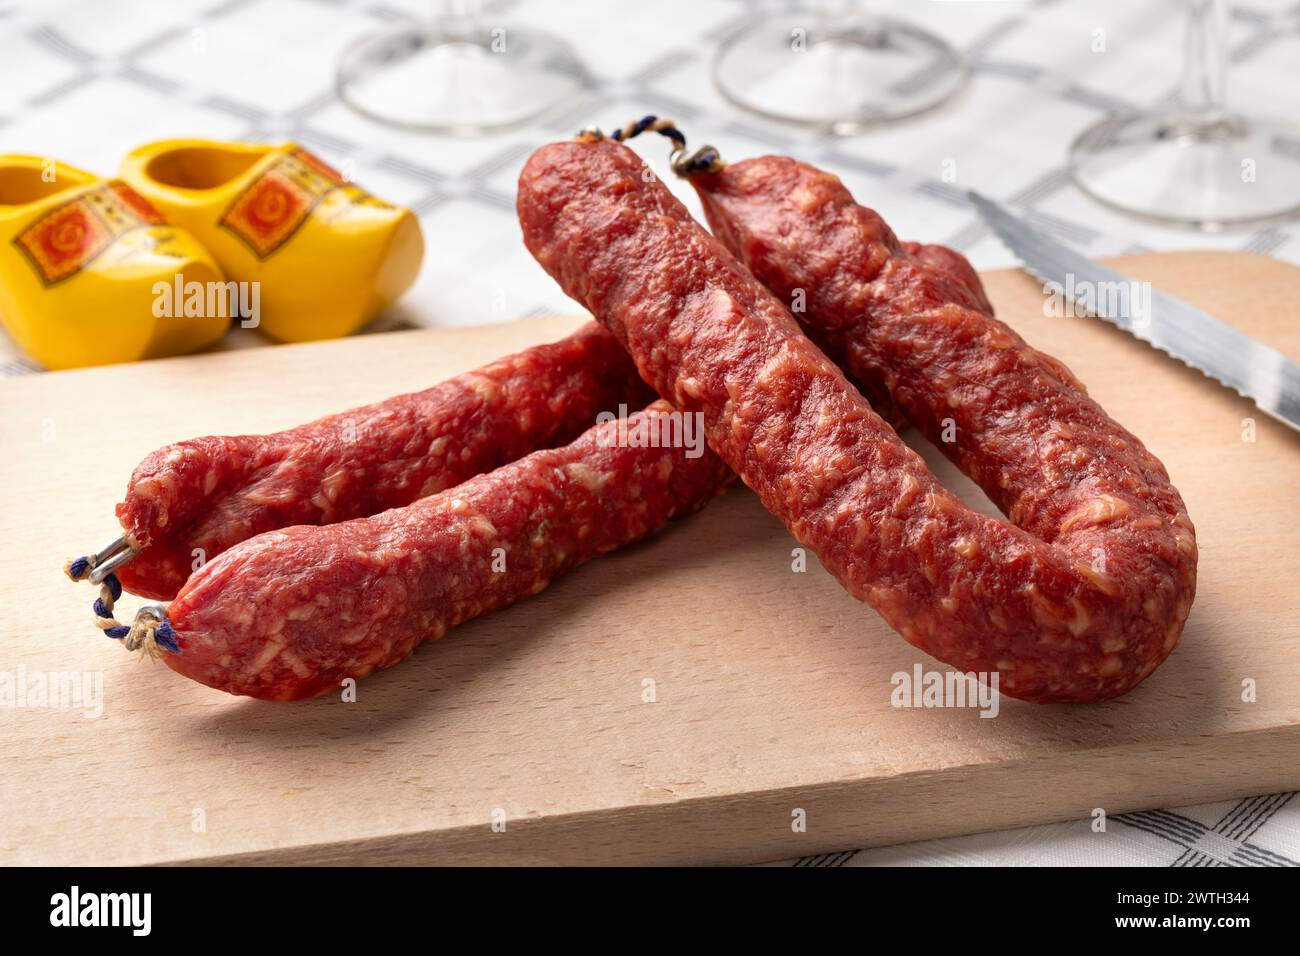 Traditional Dutch Metworst, preserved pork sausage, on a cutting board close up Stock Photo